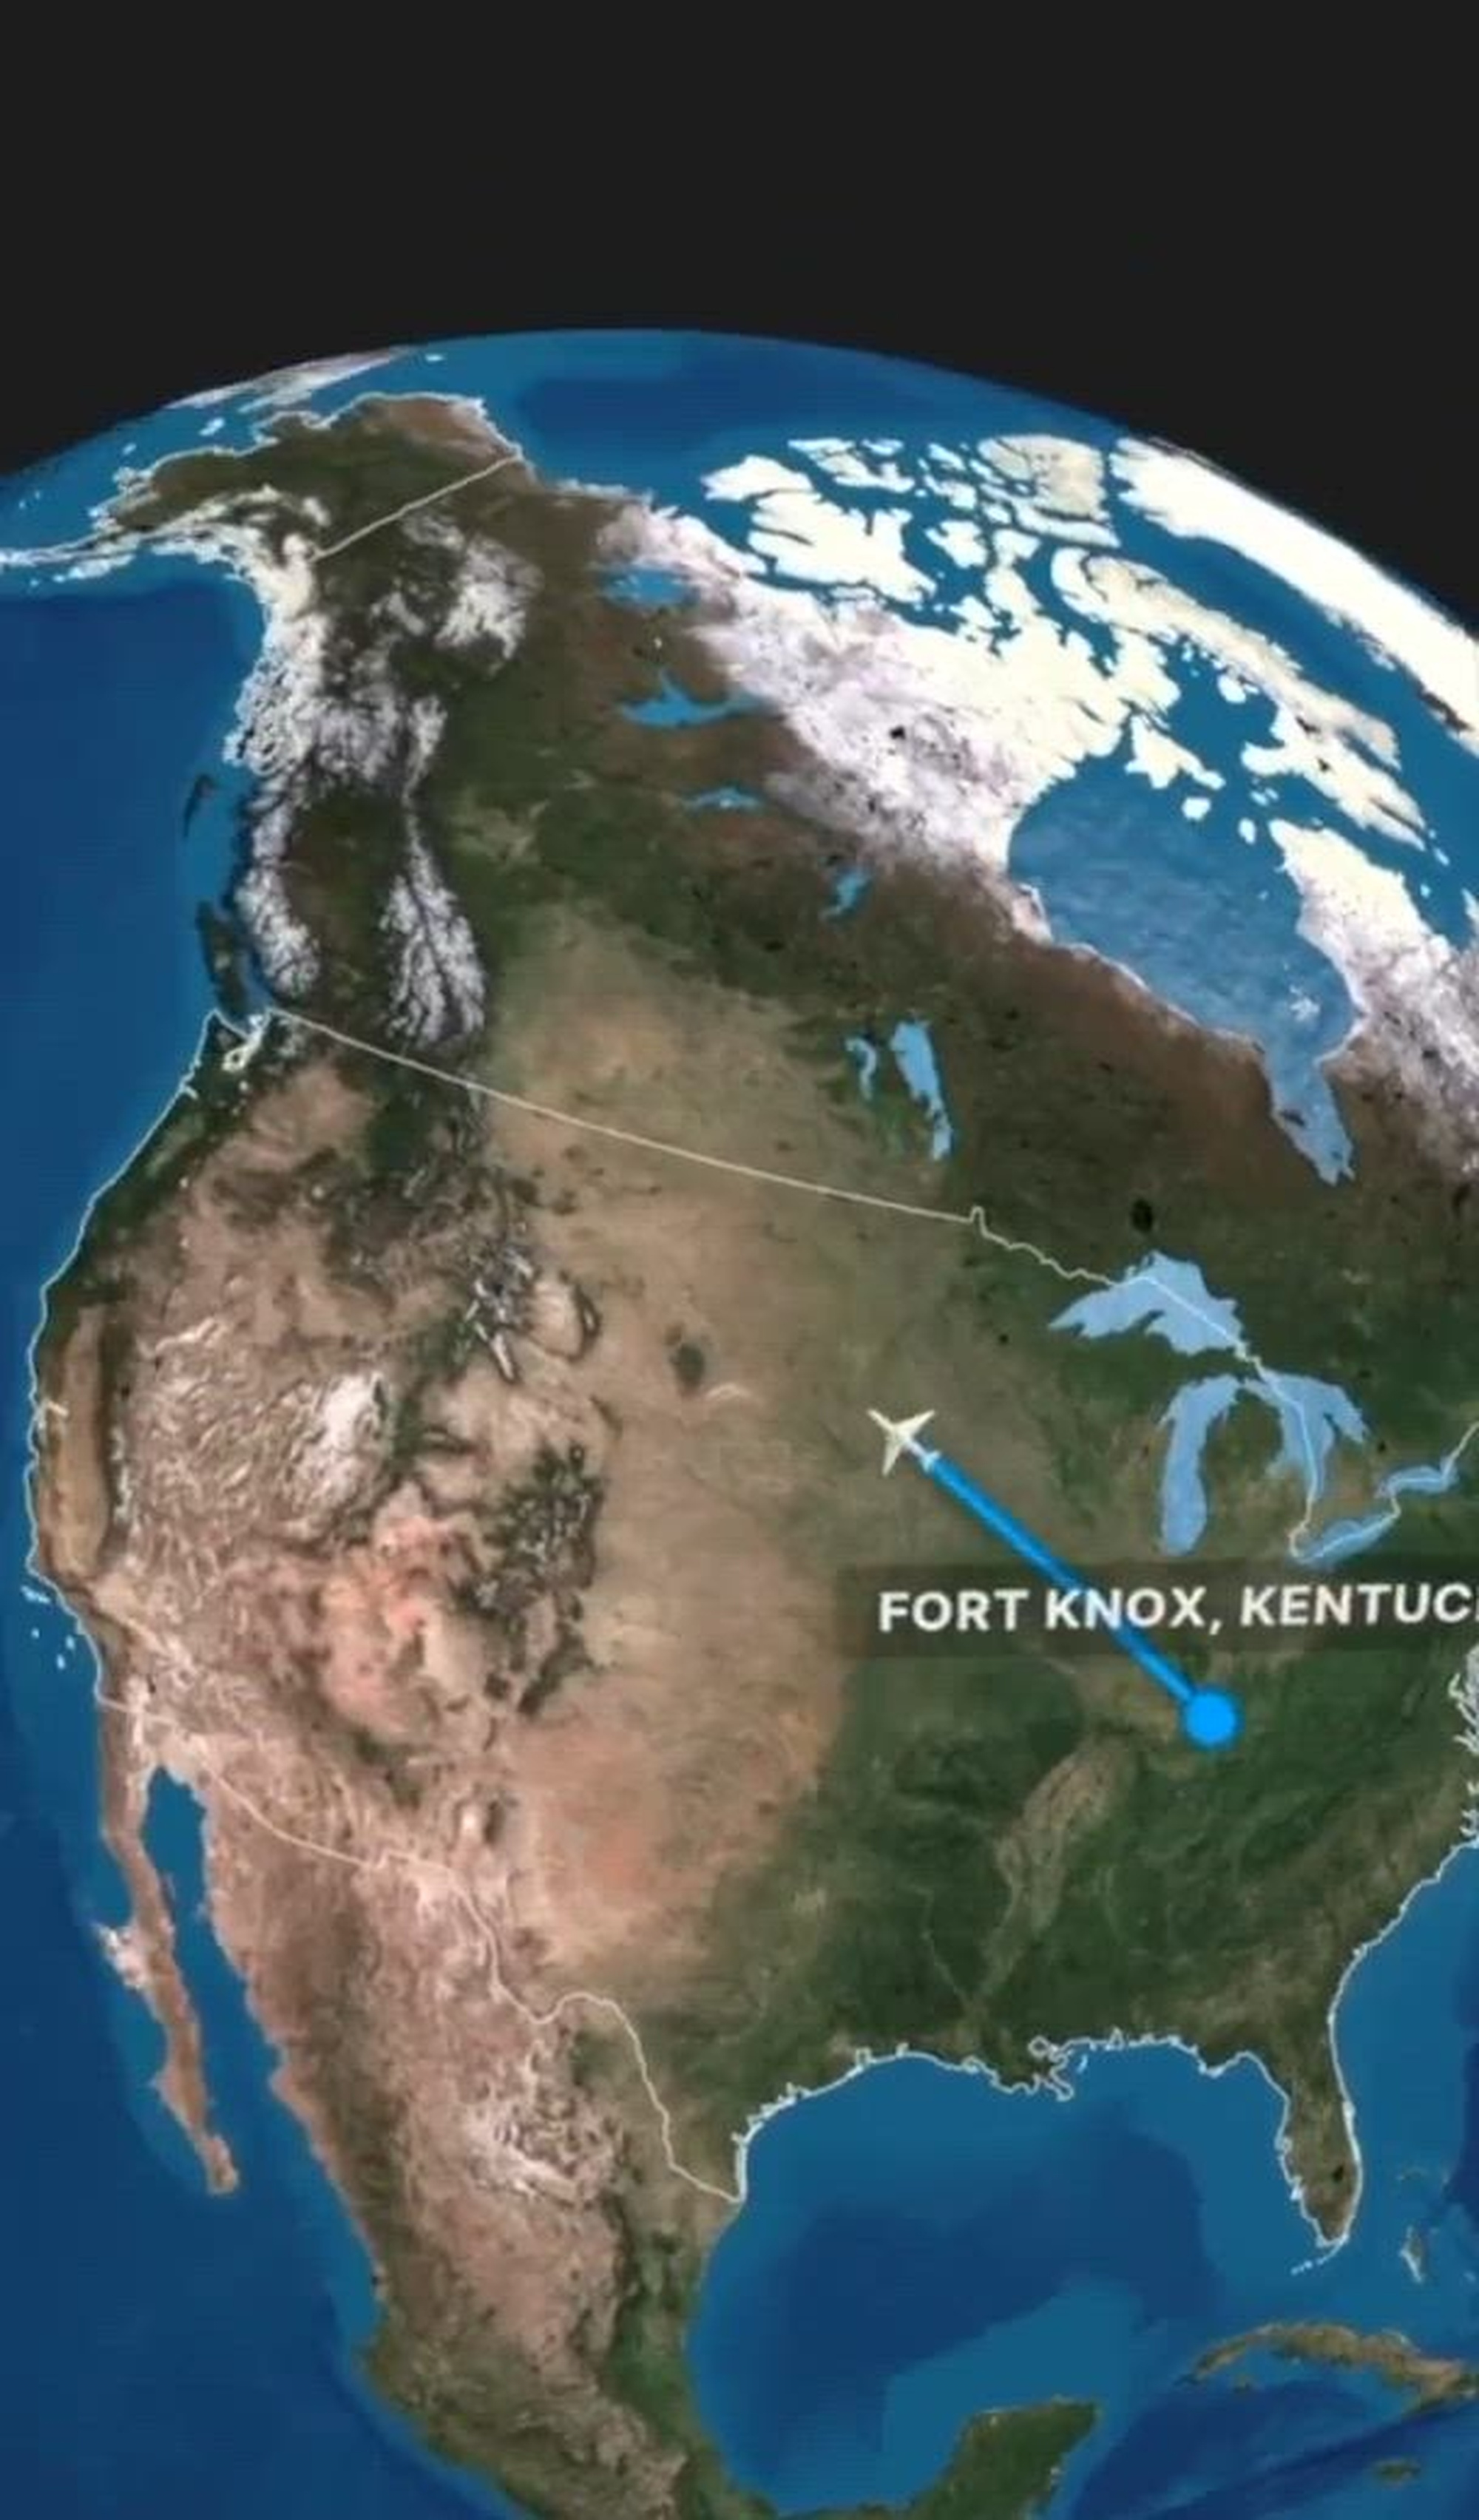 Illustrated view of North America on the globe, with Fort Knox, Ky., pinpointed. 